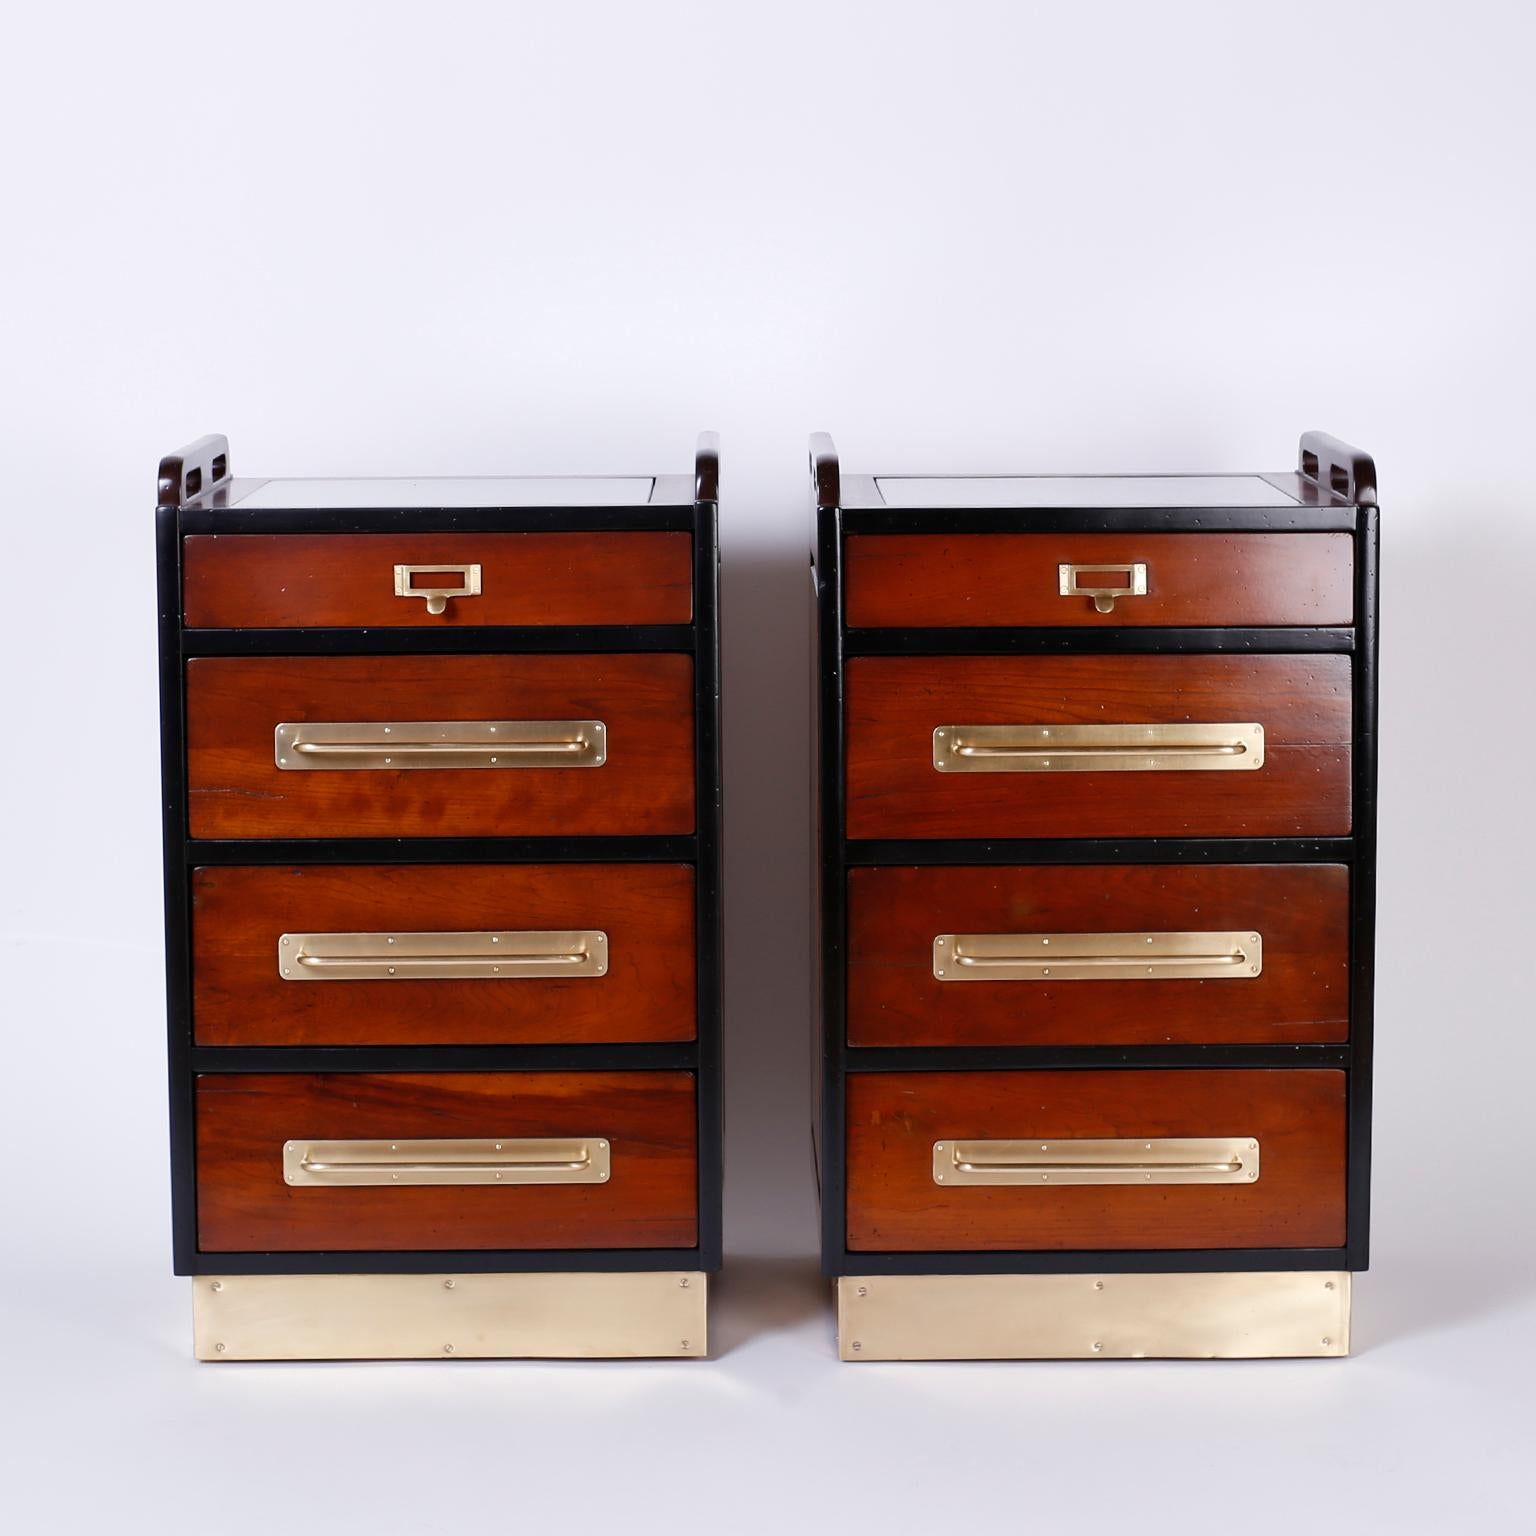 Handsome pair of nautical style mahogany nightstands with a distinctive yacht like ambiance. Featuring cut out handles and a glass insert at the top, four drawers with brass hardware, paneled sides, and a brass kick plate base slightly raised on